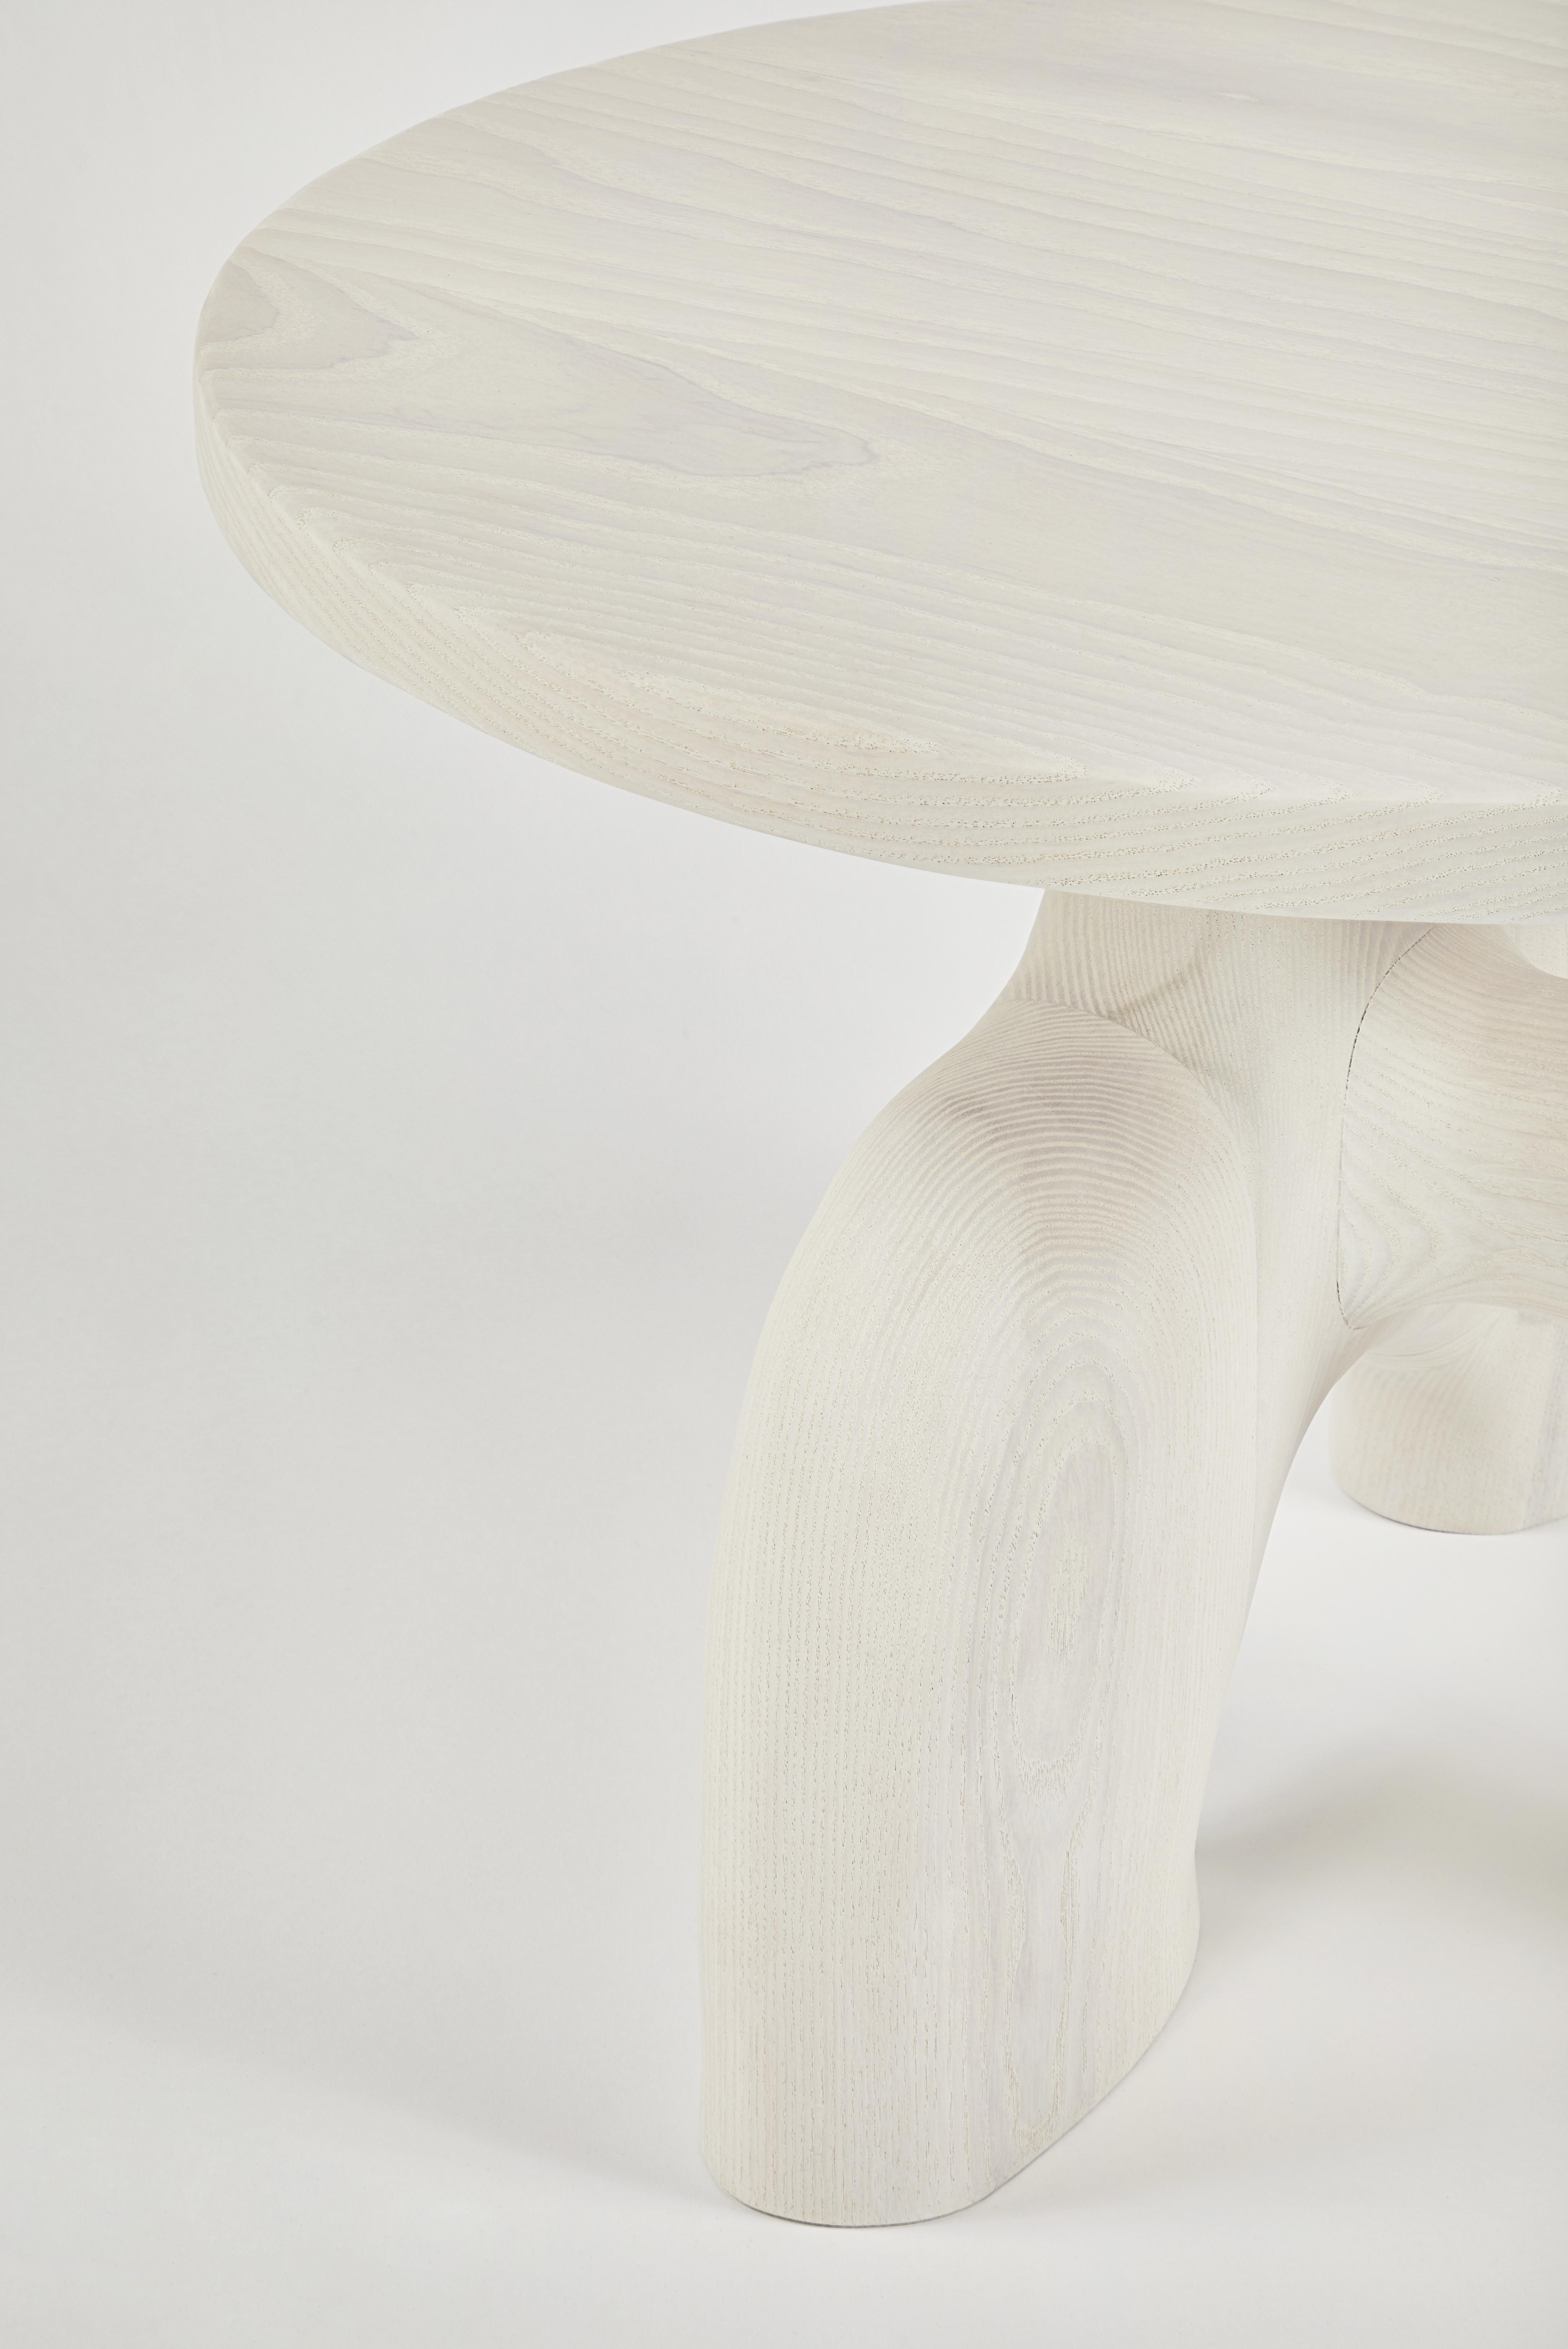 Sculptural Organic Hand Carved Bleached Ash Side Table by Casey McCafferty In New Condition For Sale In Fair Lawn, NJ